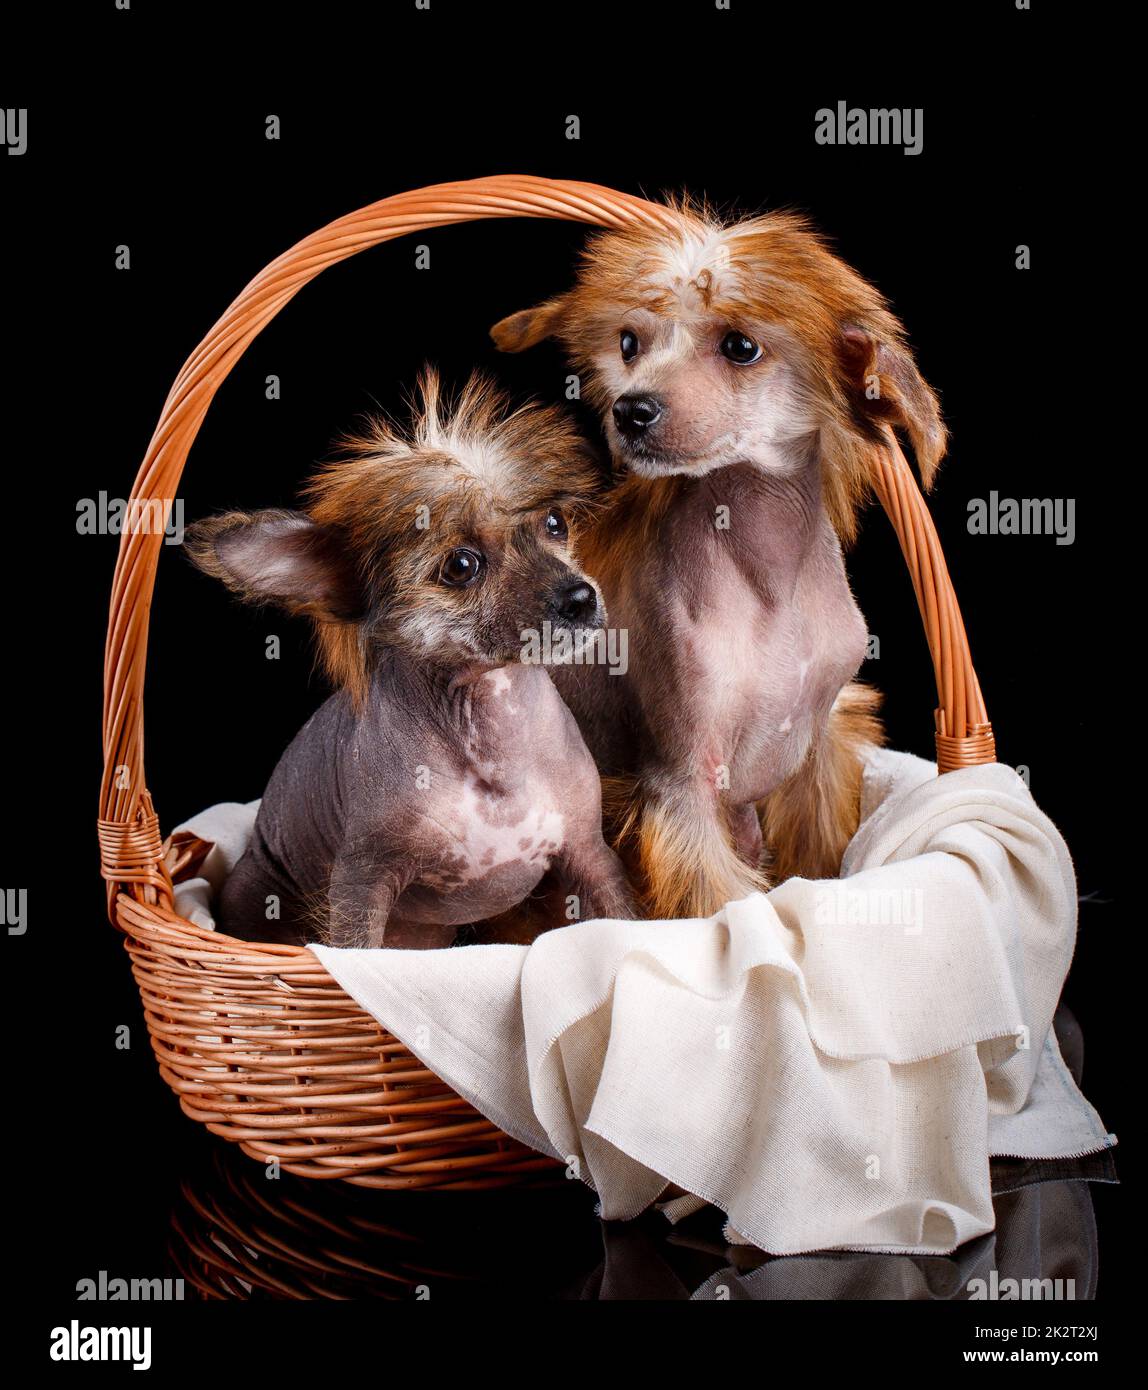 Portrait of two amazing Chinese Crested puppies sitting in a wicker basket on a black background. Stock Photo